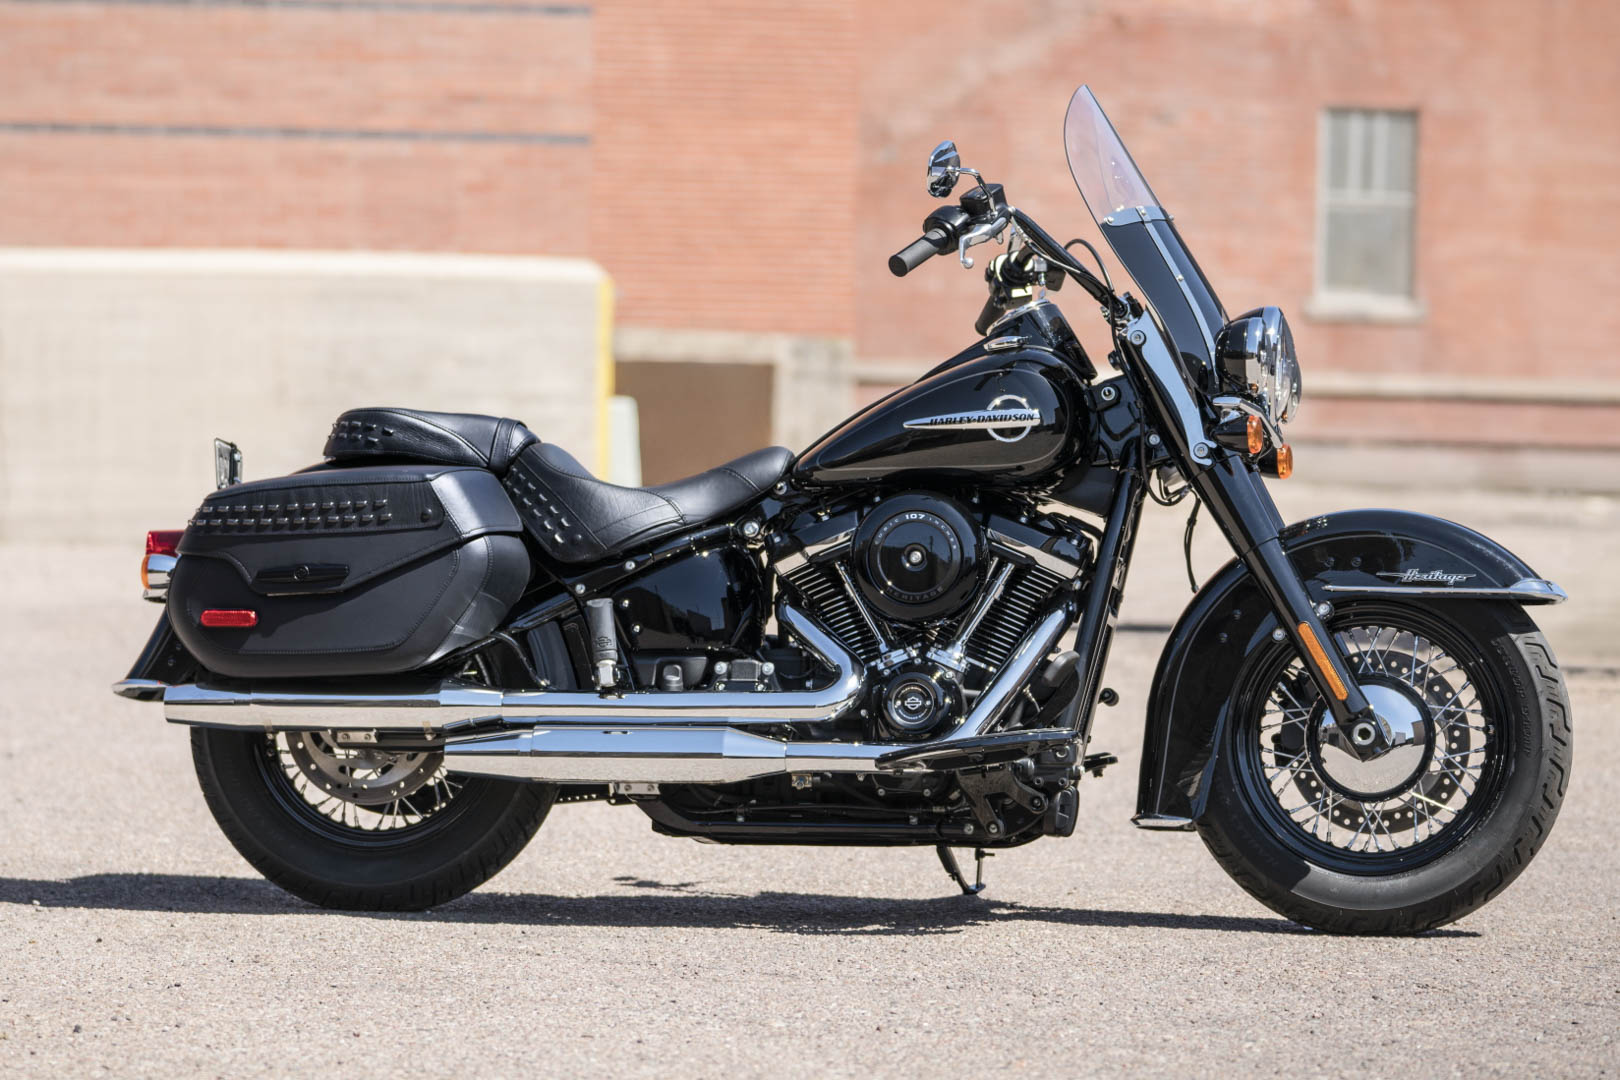 Harley-Davidson introduces its 2021 lineup